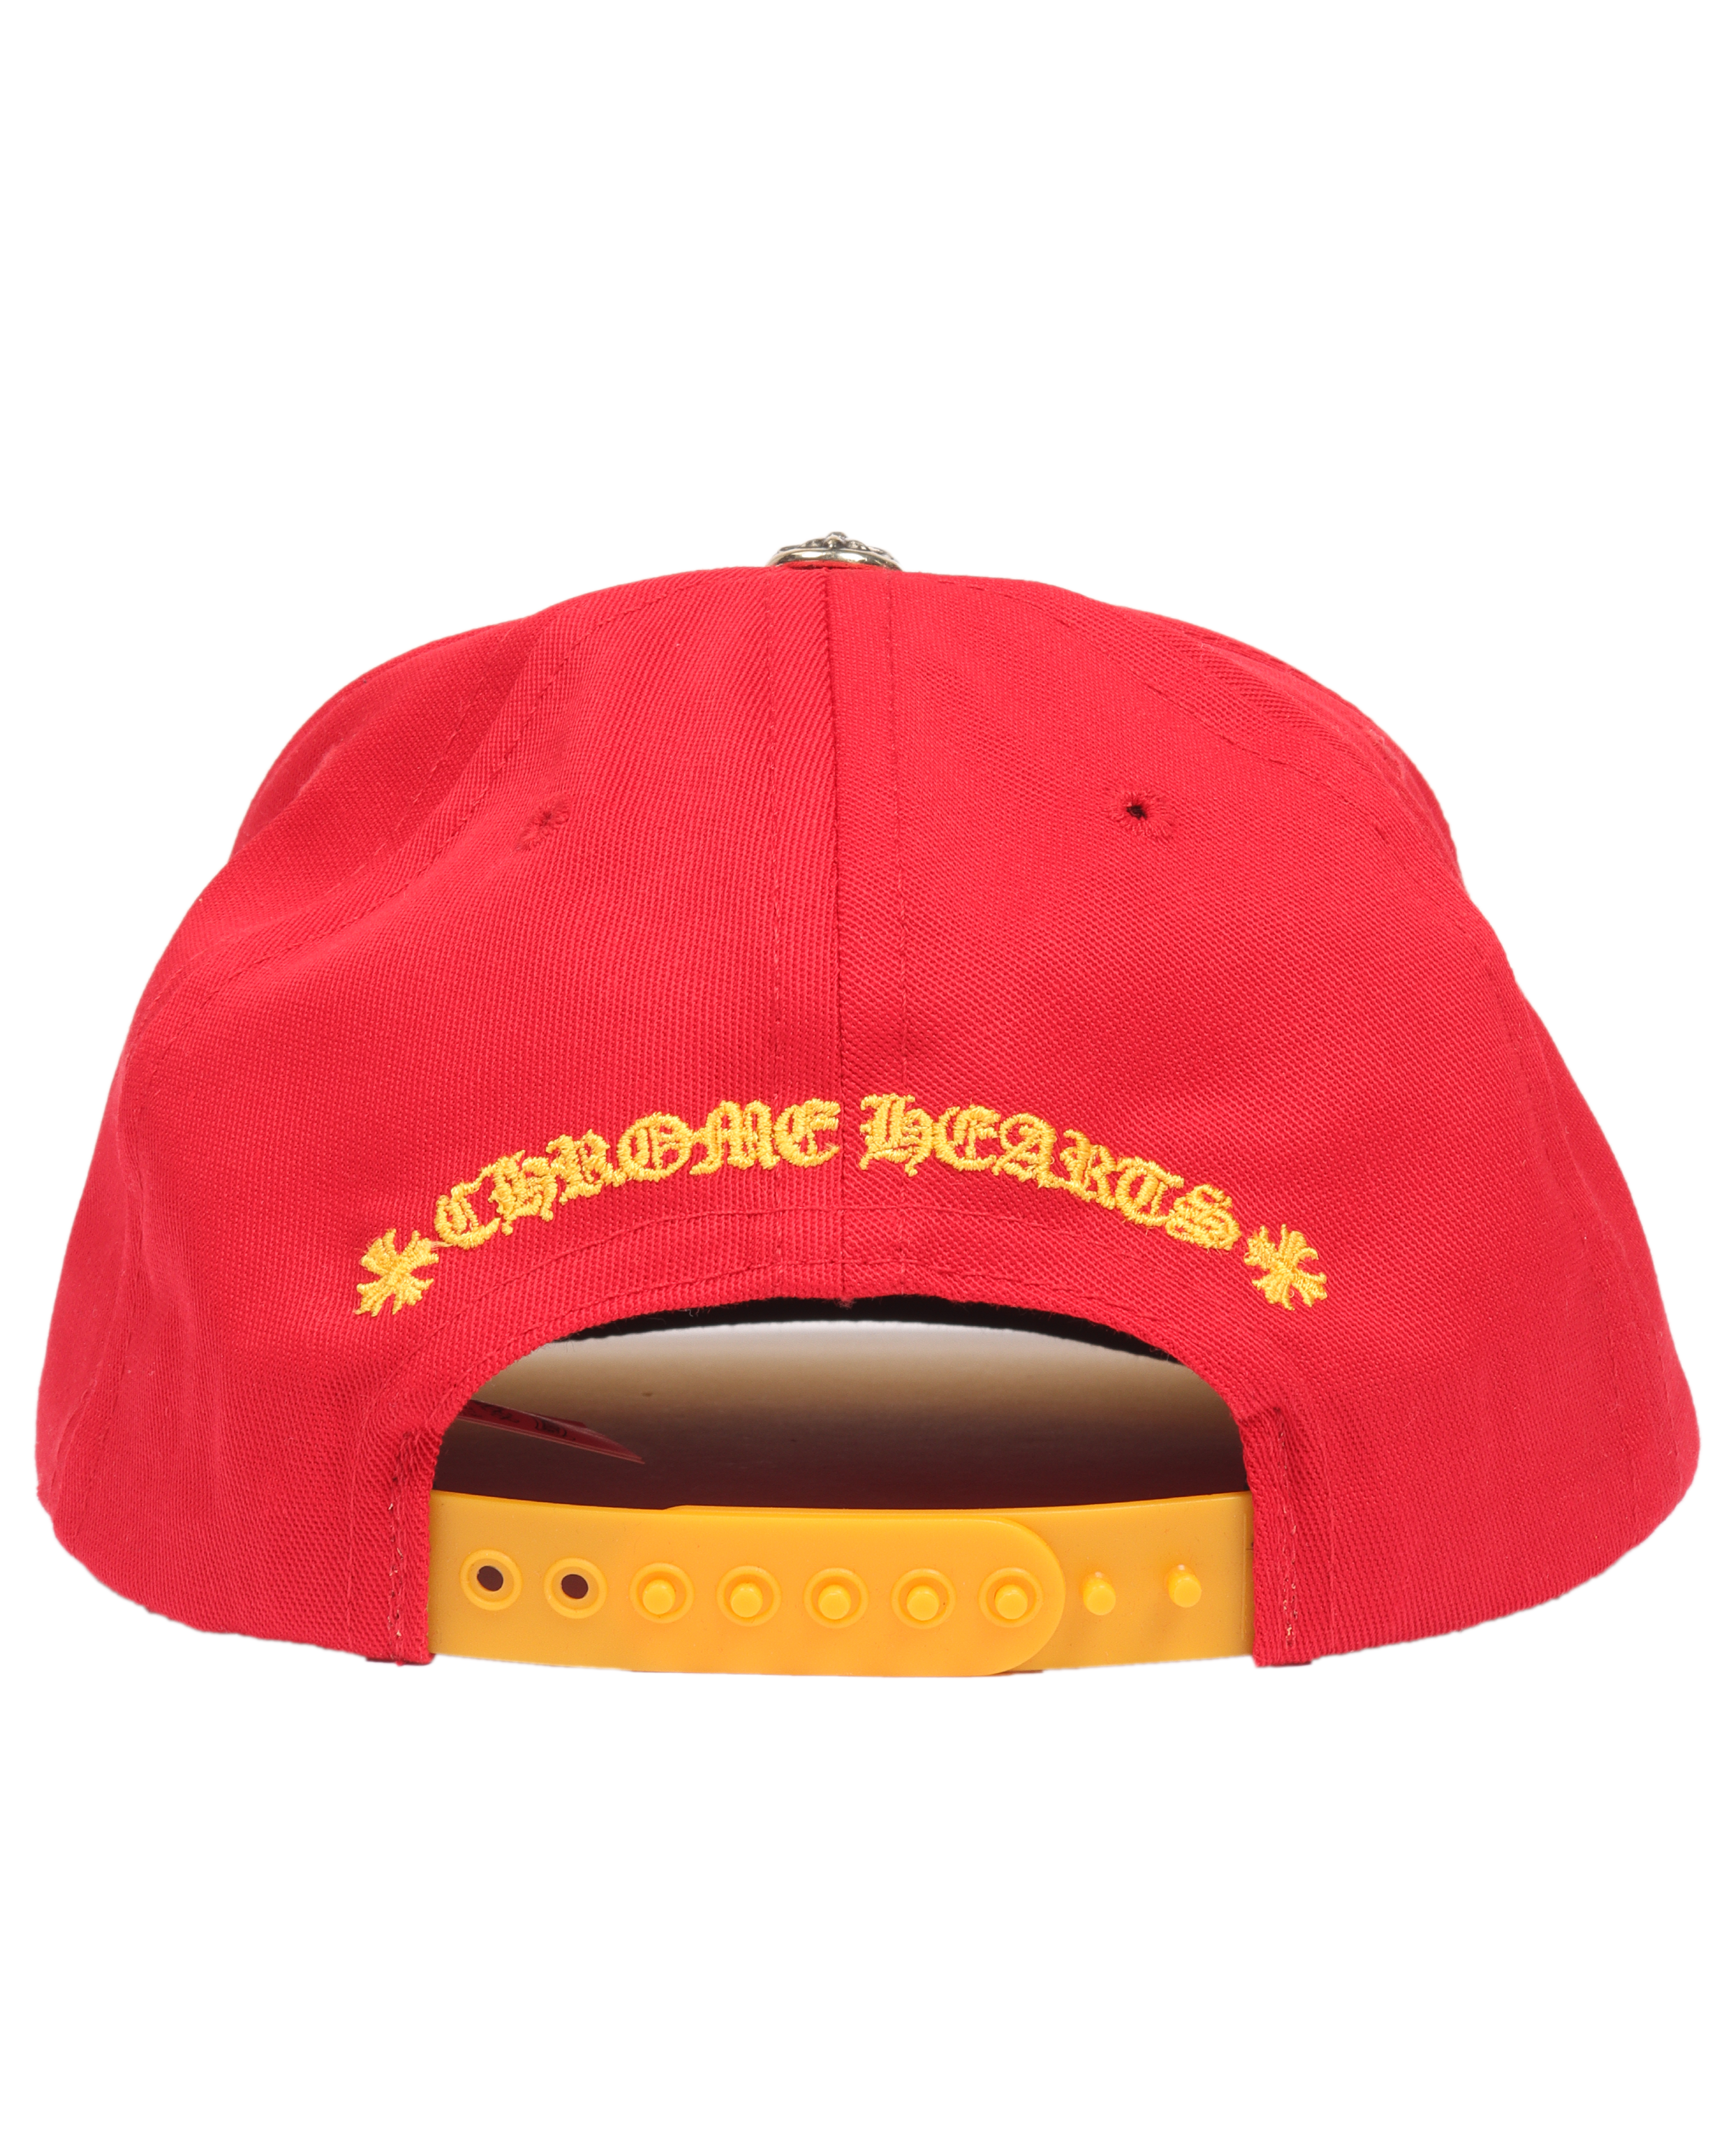 "Christmas 2021" Embroidered Logo Hat